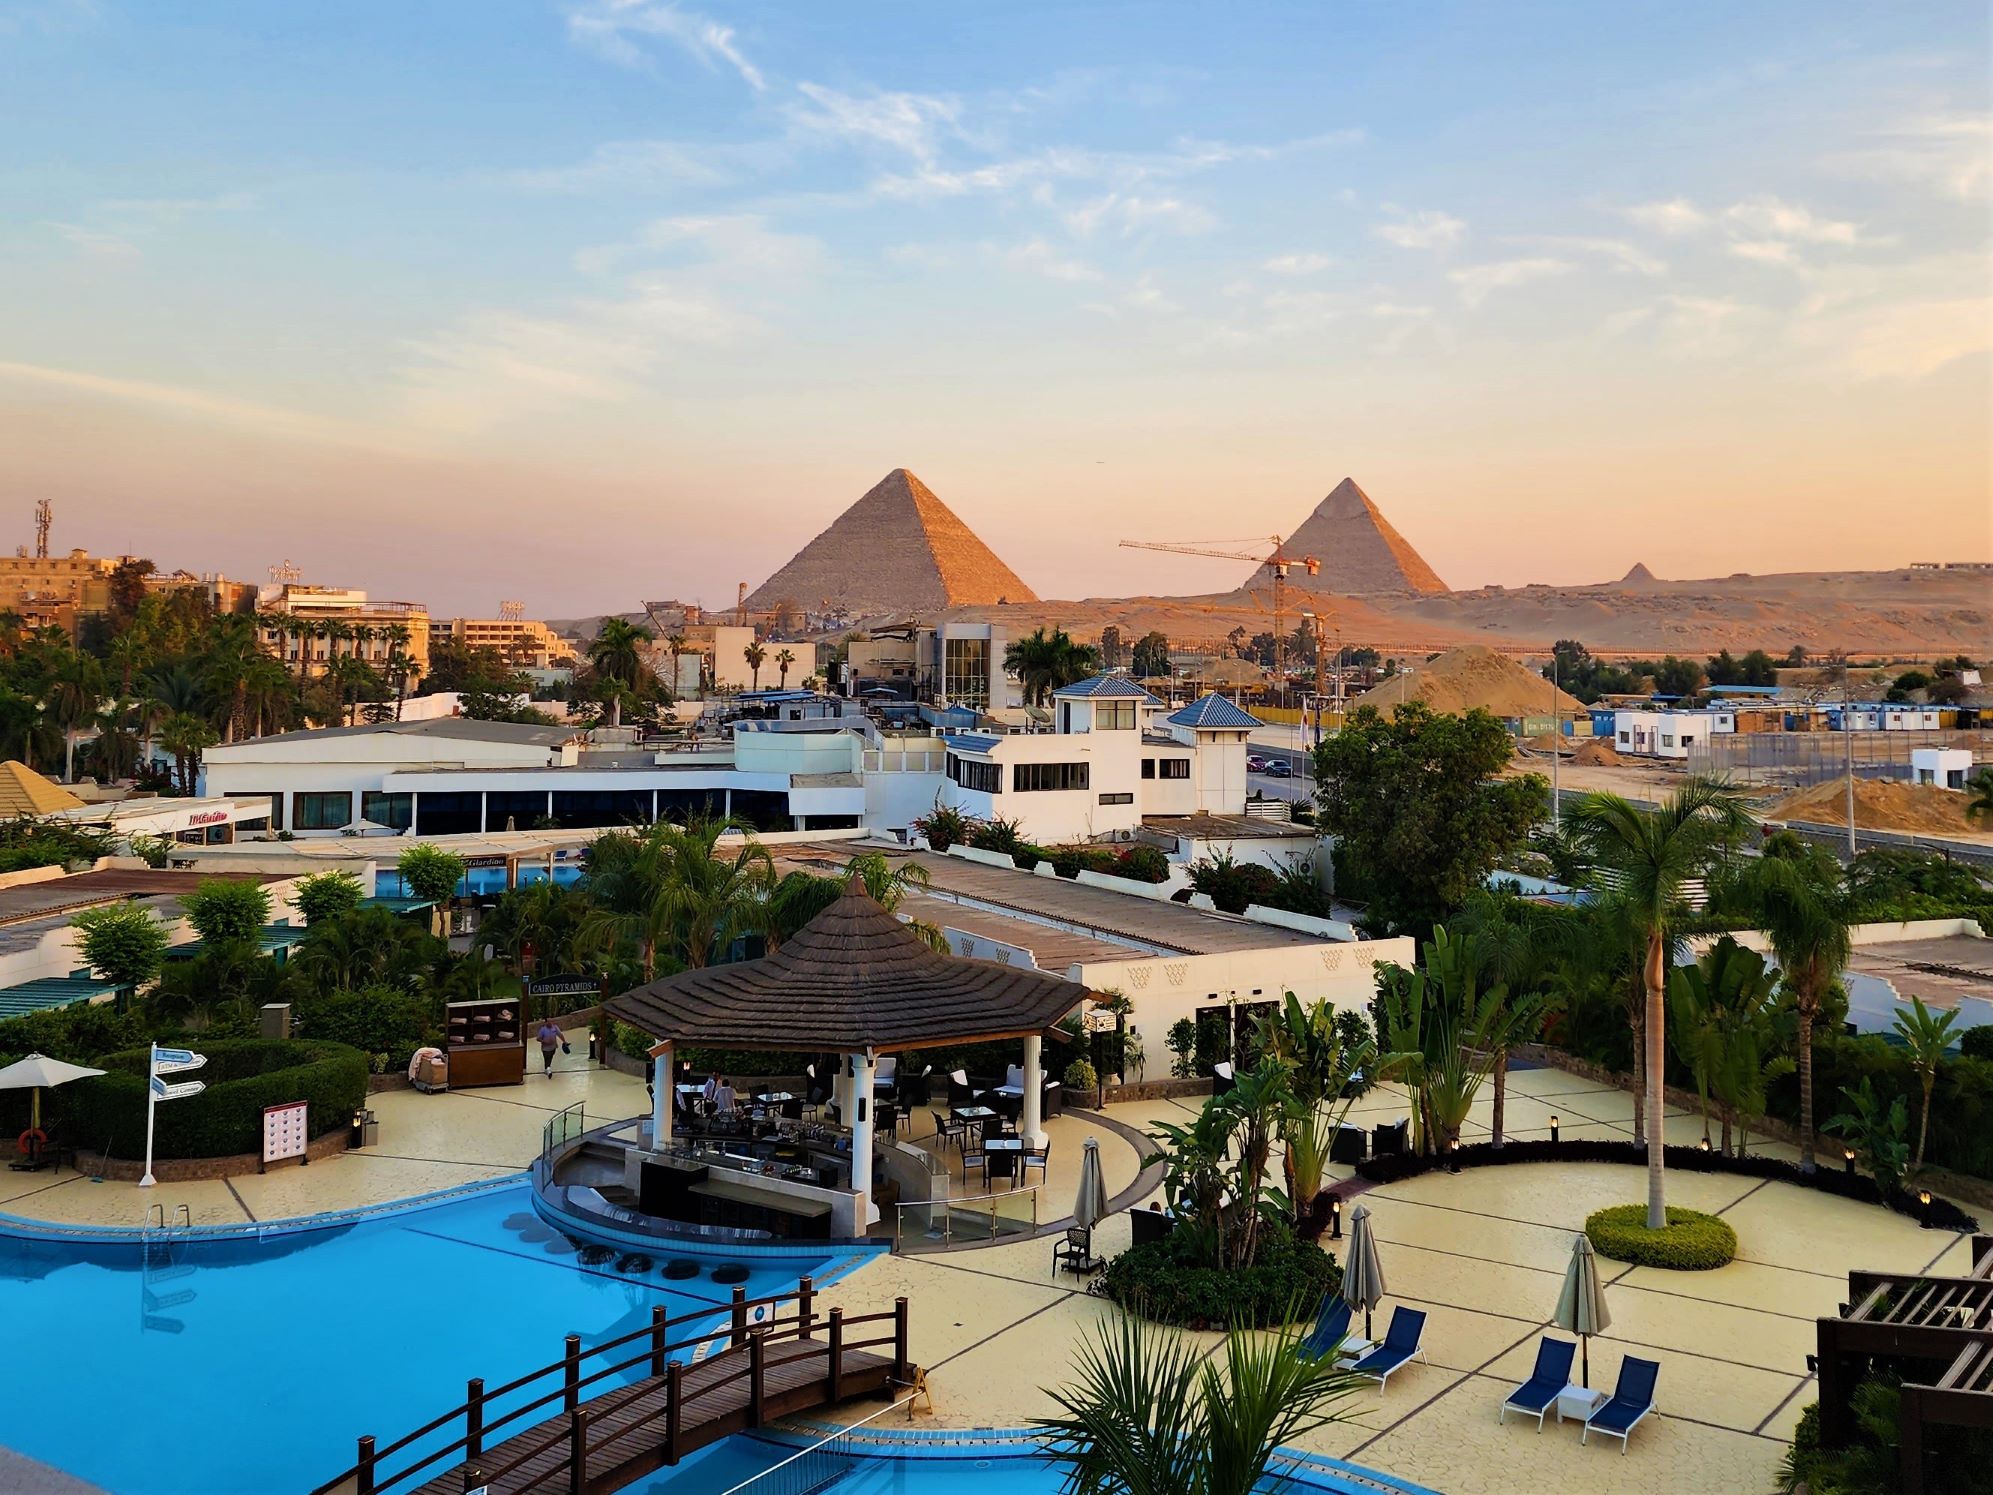 View of the Pyramids of Giza from the Steigenberger Pyramids hotel